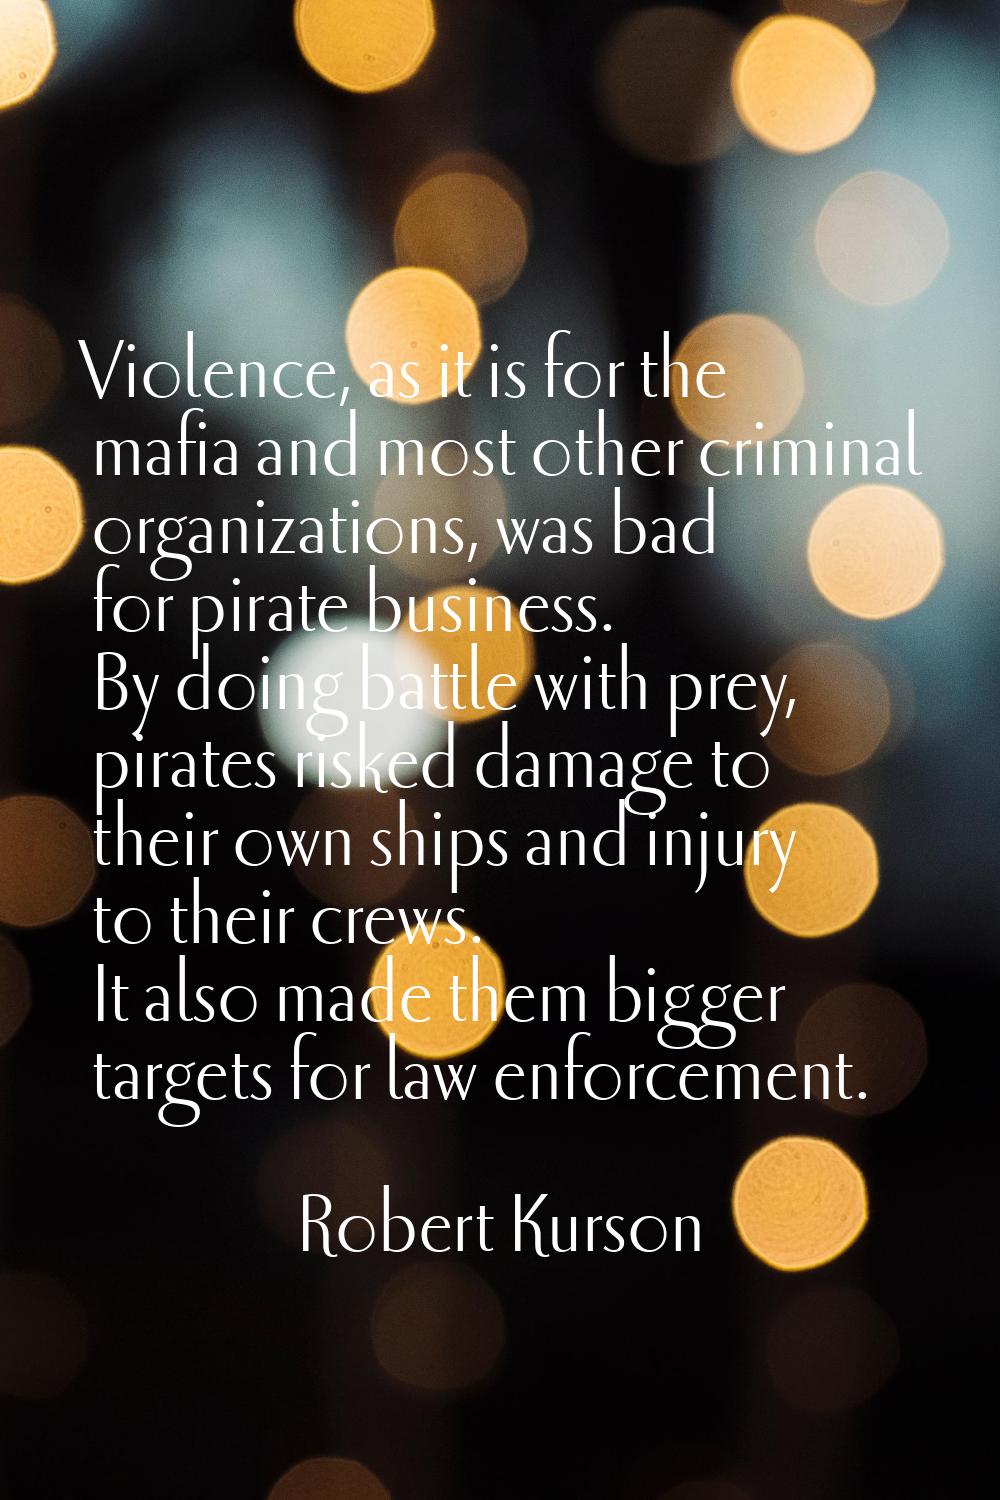 Violence, as it is for the mafia and most other criminal organizations, was bad for pirate business